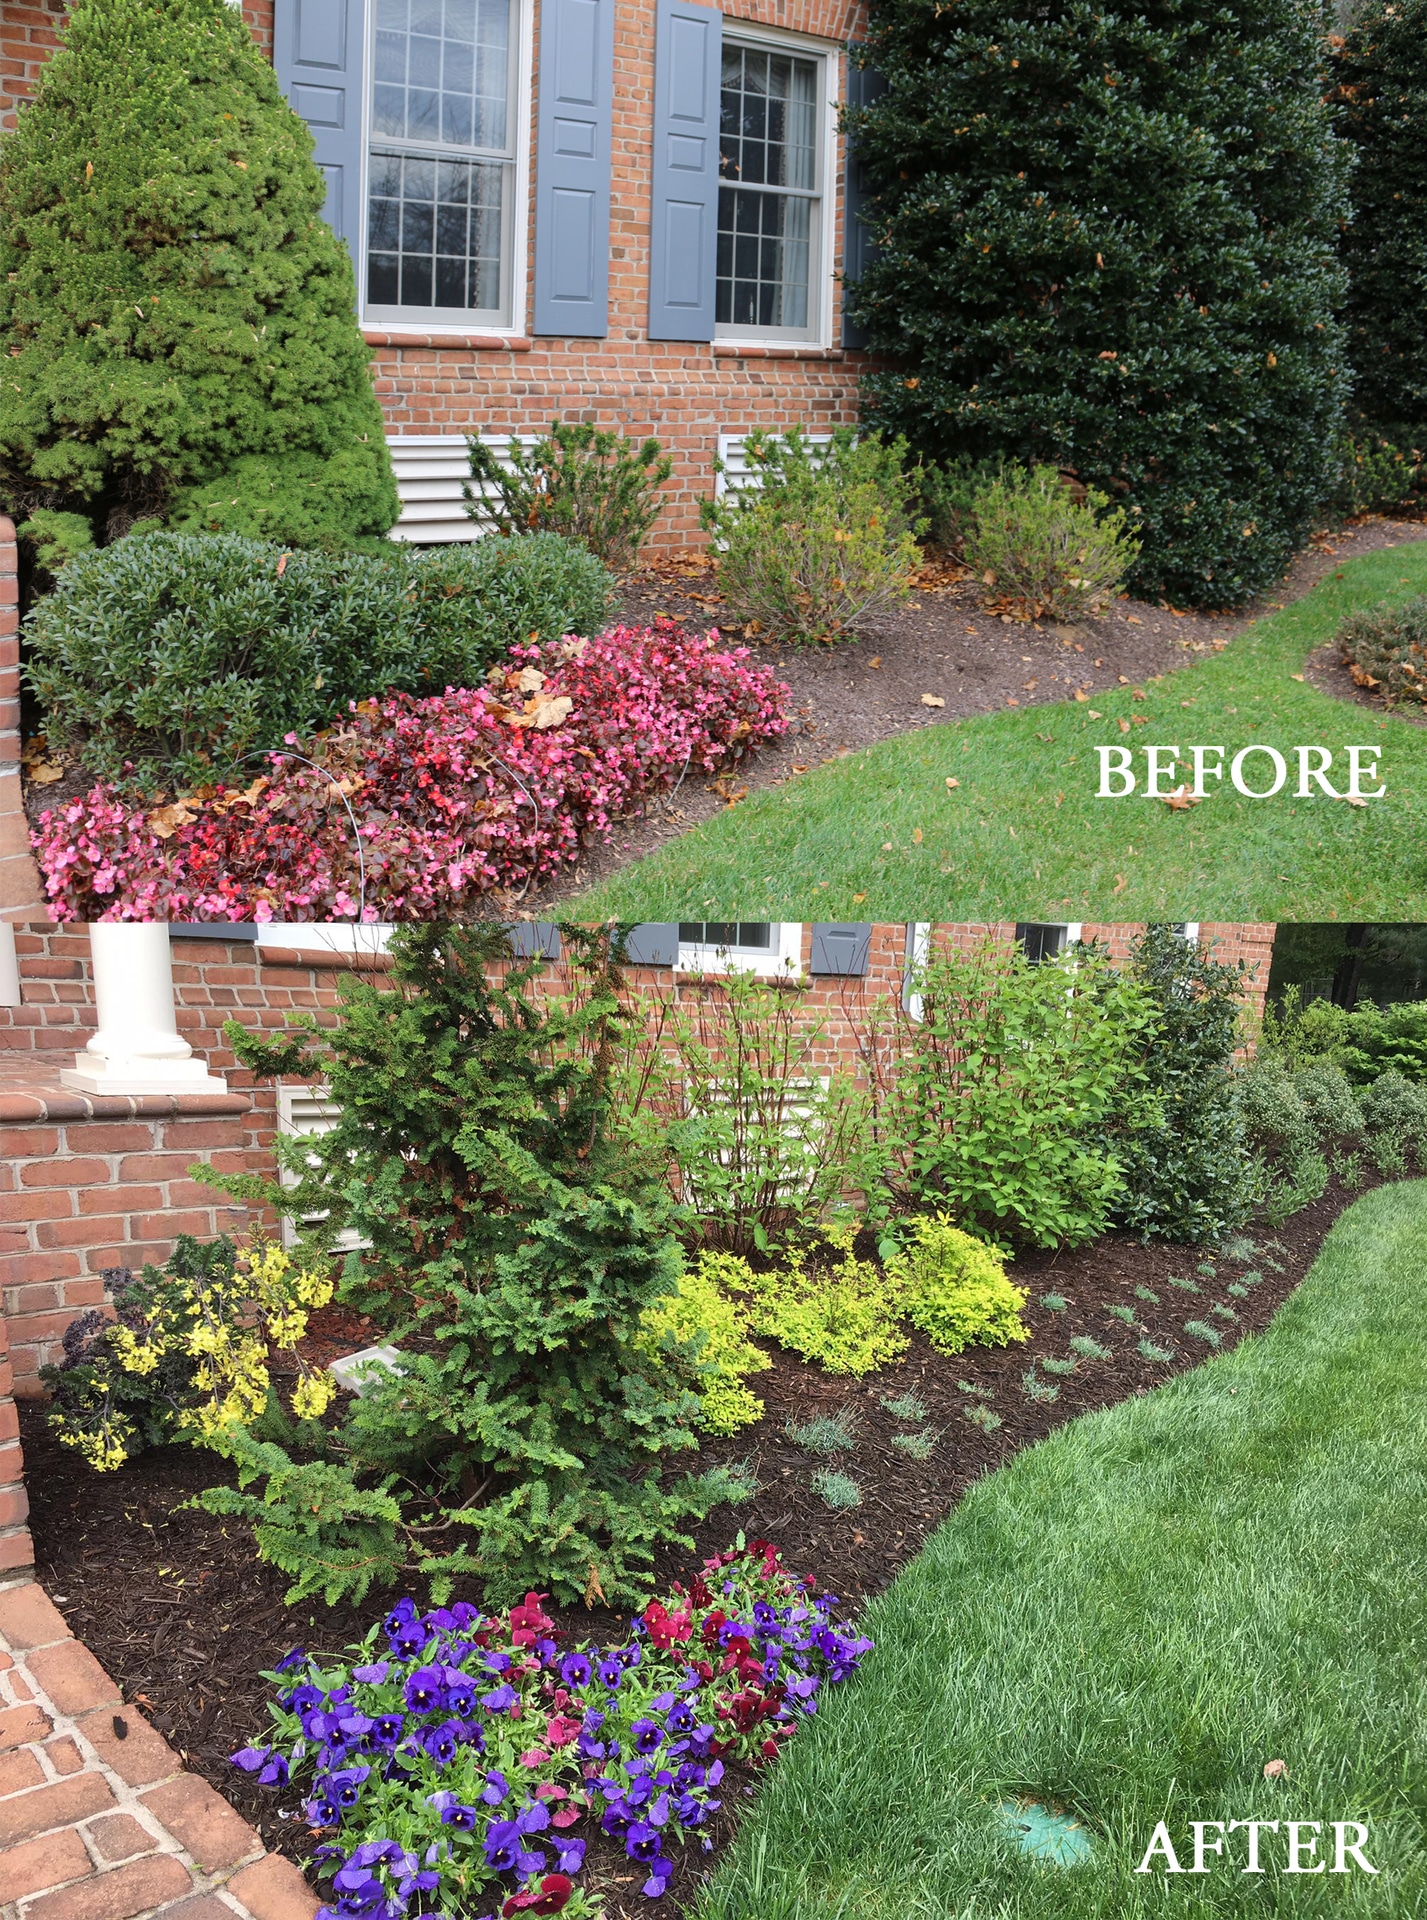 How Much Does Landscaping Cost? - Landscape Design ...